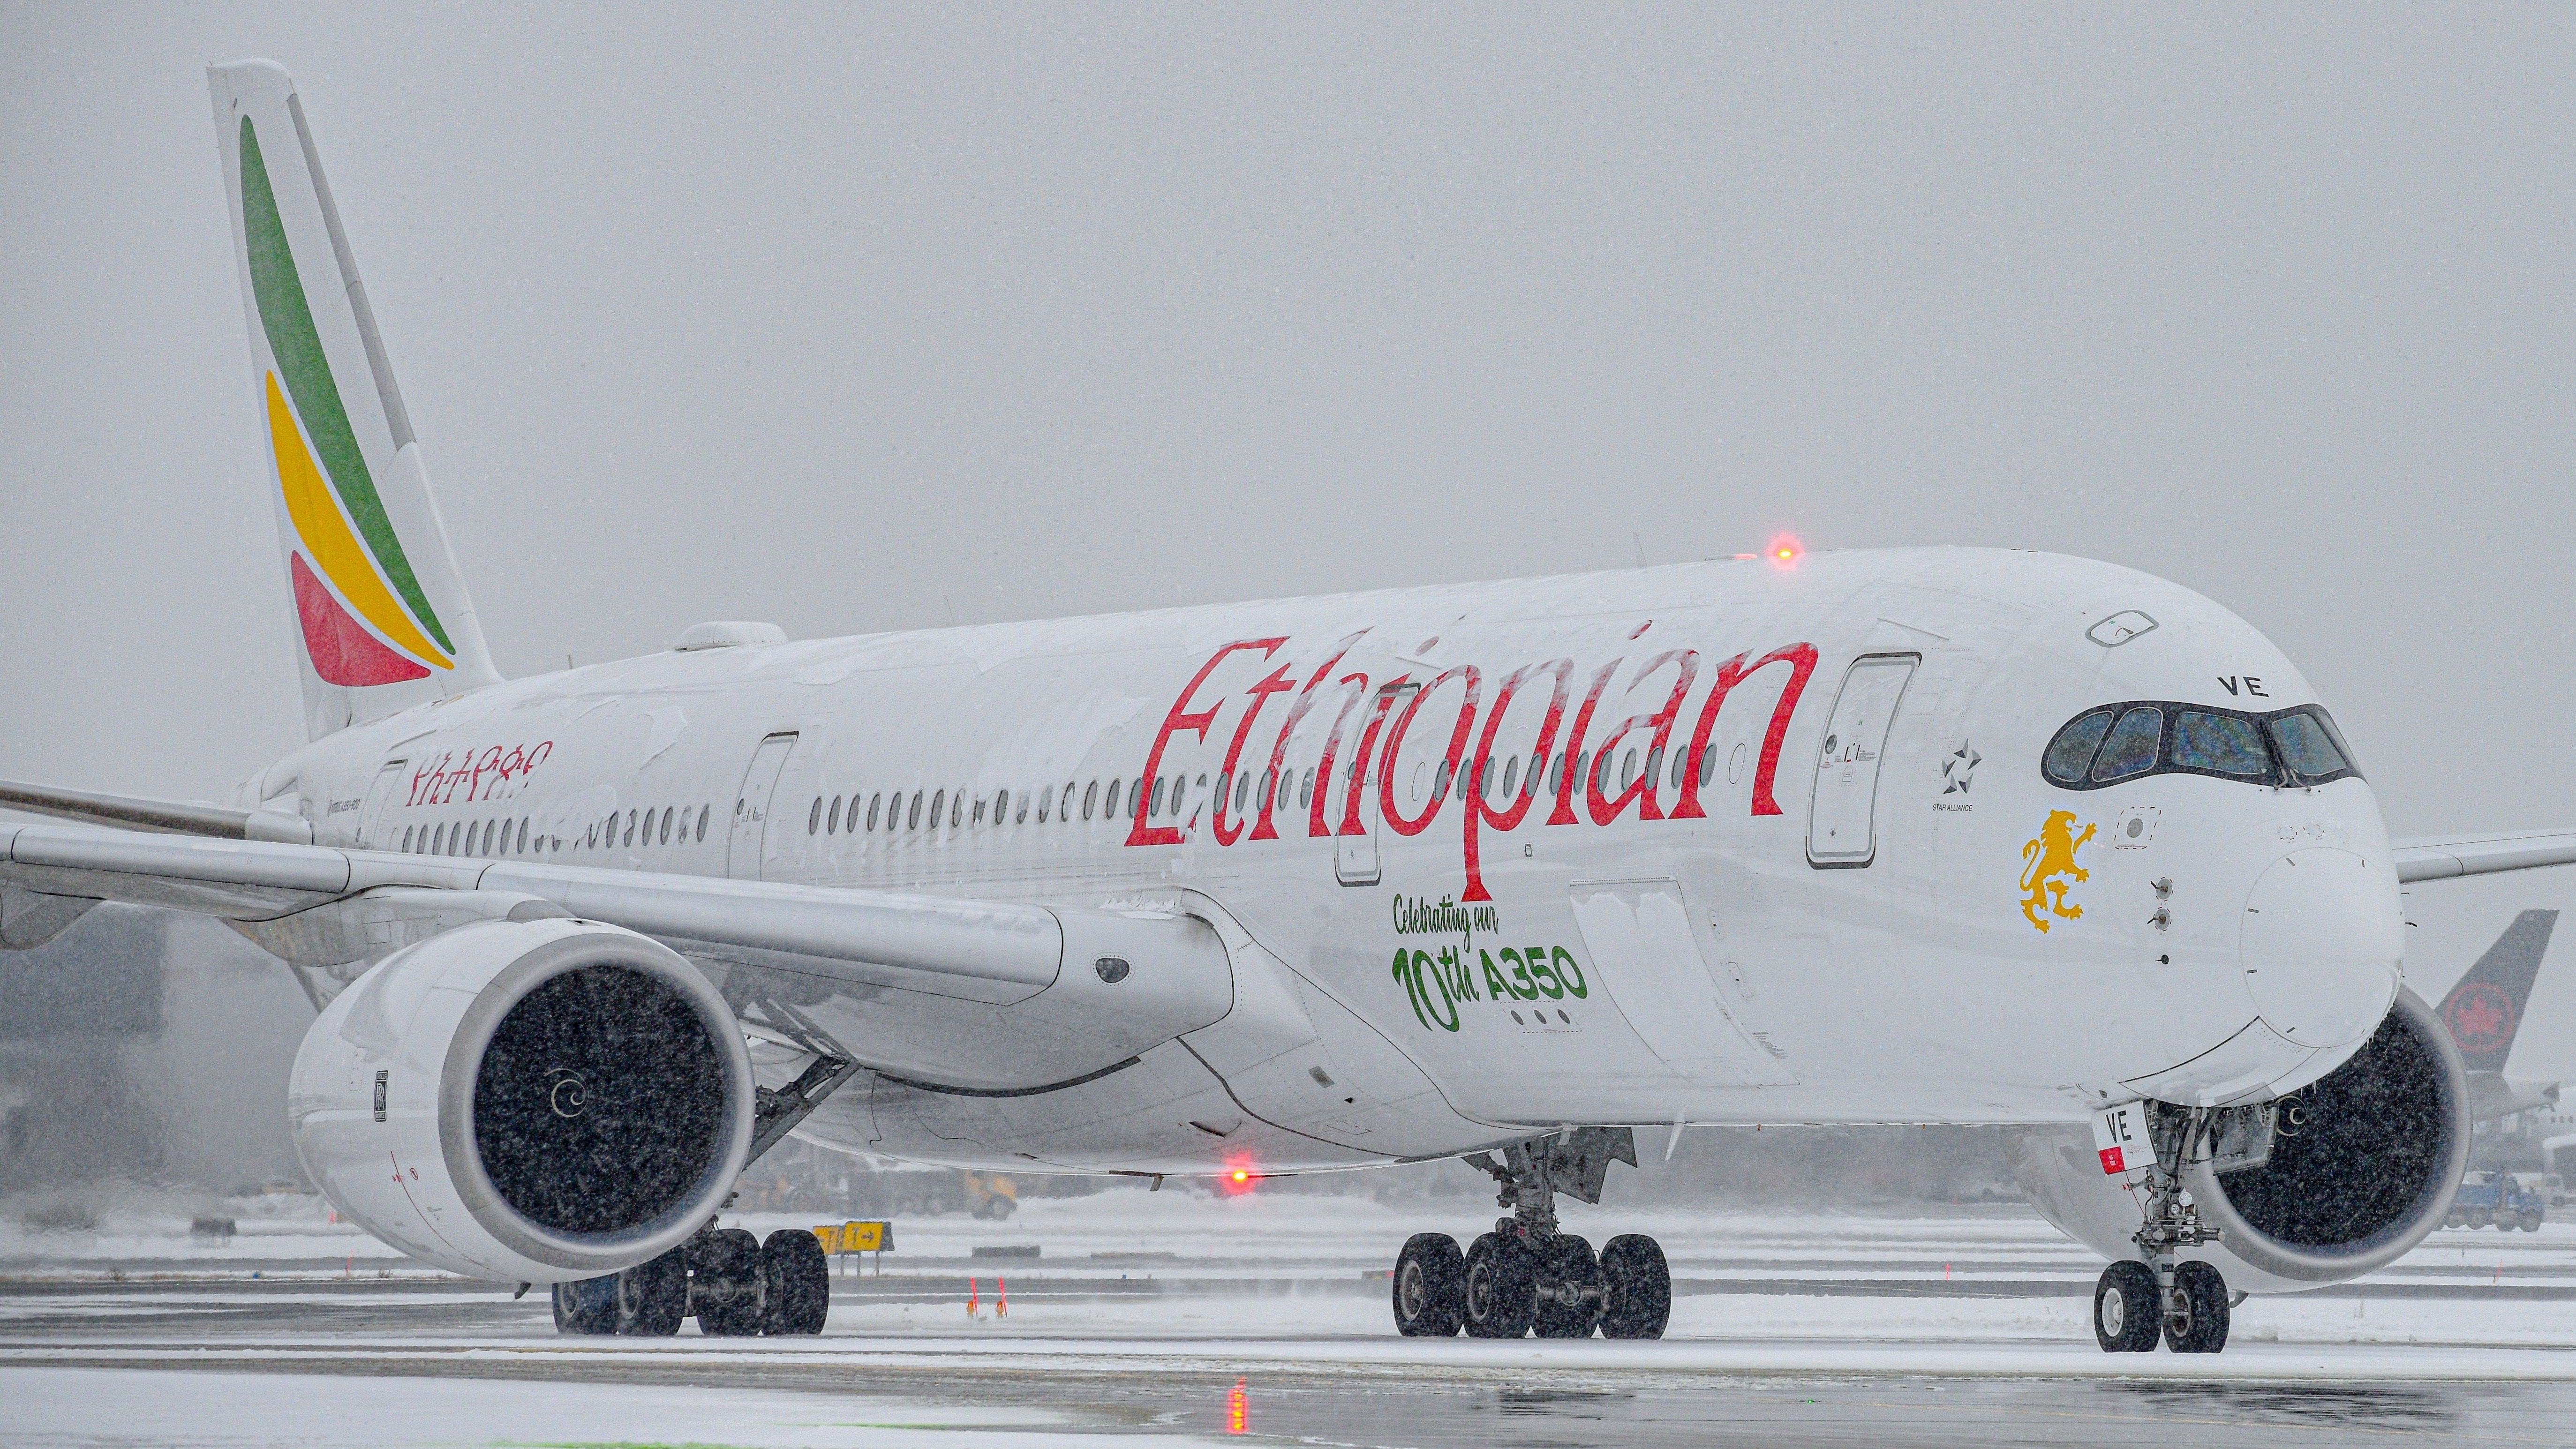 Ethiopian Airlines A350-900 in Toronto